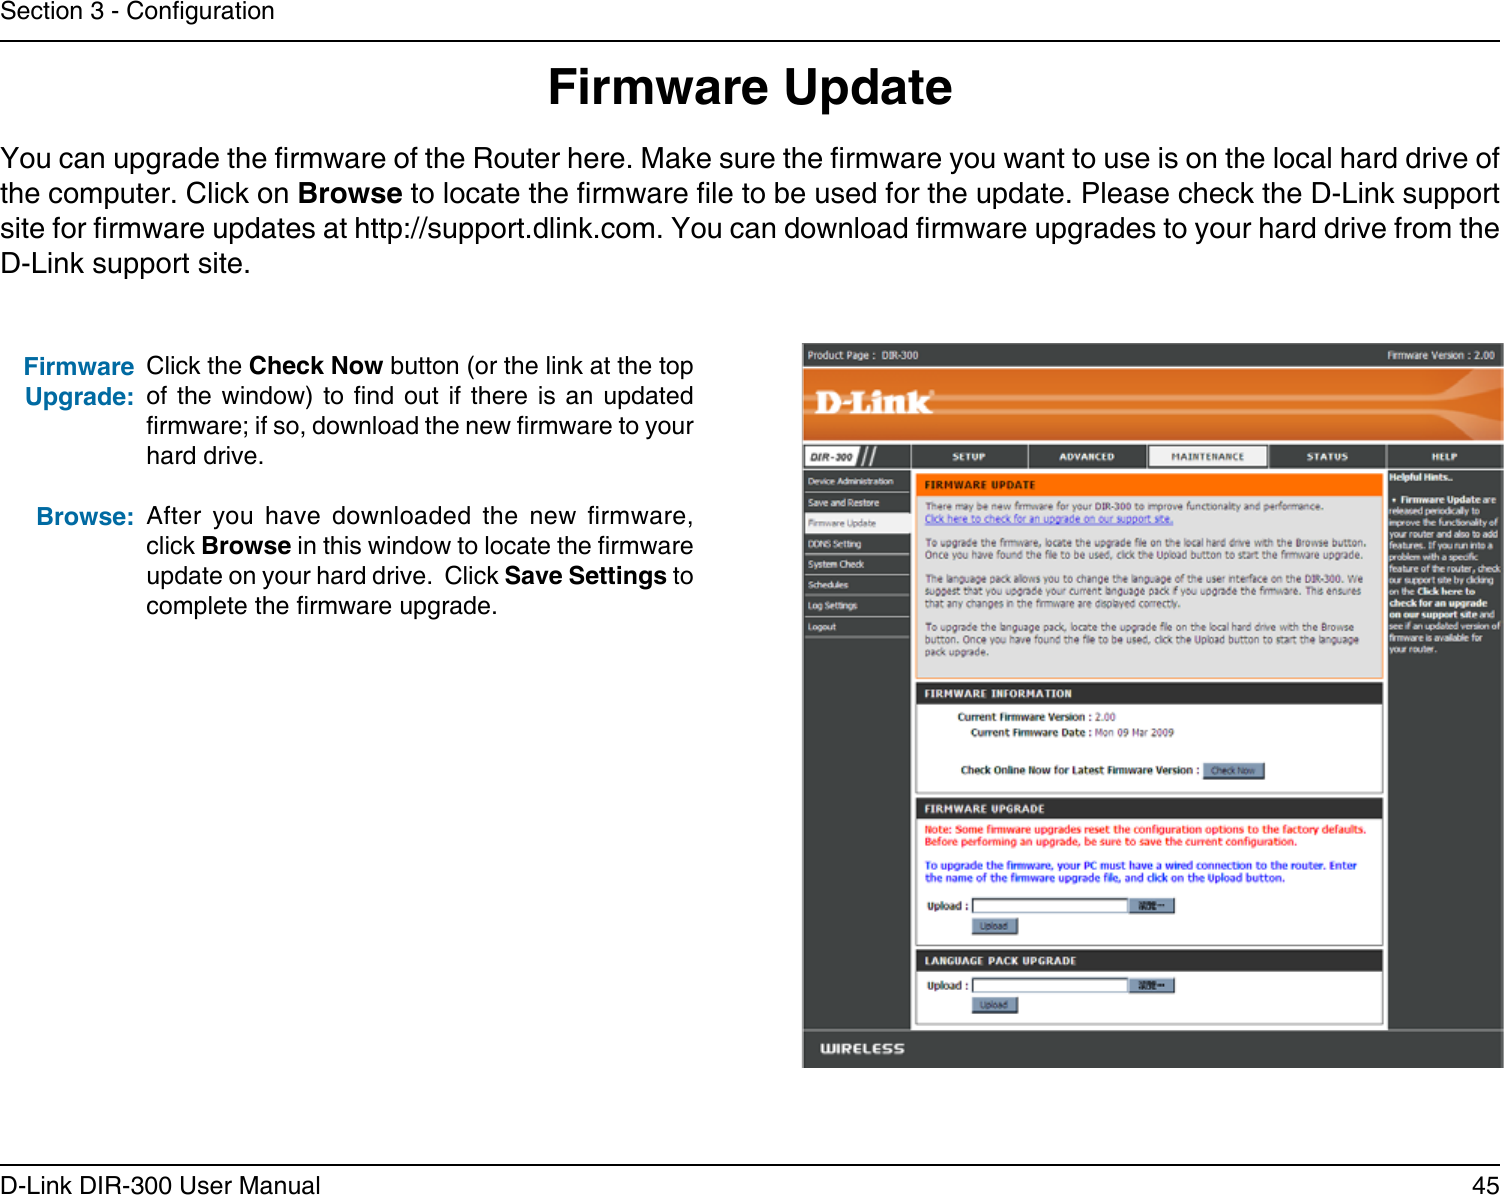 45D-Link DIR-300 User ManualSection 3 - CongurationFirmware UpdateClick the Check Now button (or the link at the top of the  window)  to nd out if  there  is an updated rmware; if so, download the new rmware to your hard drive.After  you  have  downloaded  the  new  rmware, click Browse in this window to locate the rmware update on your hard drive.  Click Save Settings to complete the rmware upgrade.Firmware Upgrade:Browse:You can upgrade the rmware of the Router here. Make sure the rmware you want to use is on the local hard drive of the computer. Click on Browse to locate the rmware le to be used for the update. Please check the D-Link support site for rmware updates at http://support.dlink.com. You can download rmware upgrades to your hard drive from the D-Link support site.